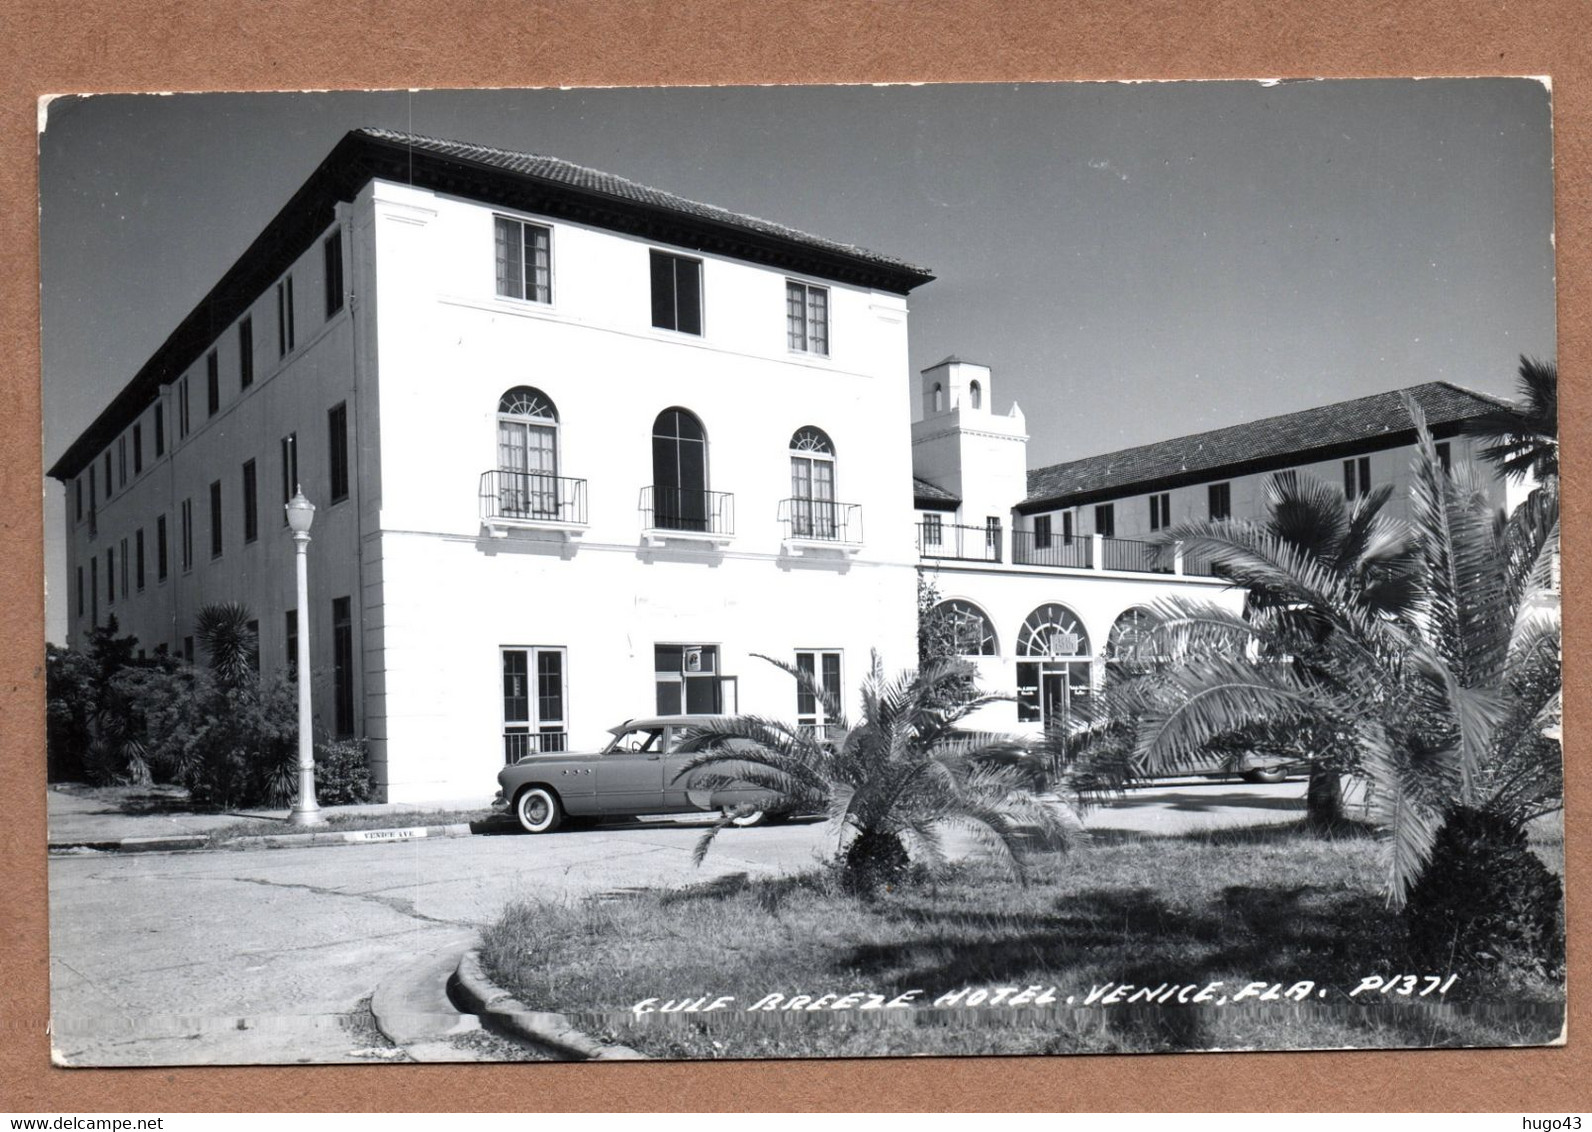 (RECTO / VERSO) VENICE 1957 - GULF BREEZE HOTEL WITH OLD CAR / VIEILLE VOITURE - LEGER PLI ANGLE BAS A GAUCHE - FMT CPA - Venice